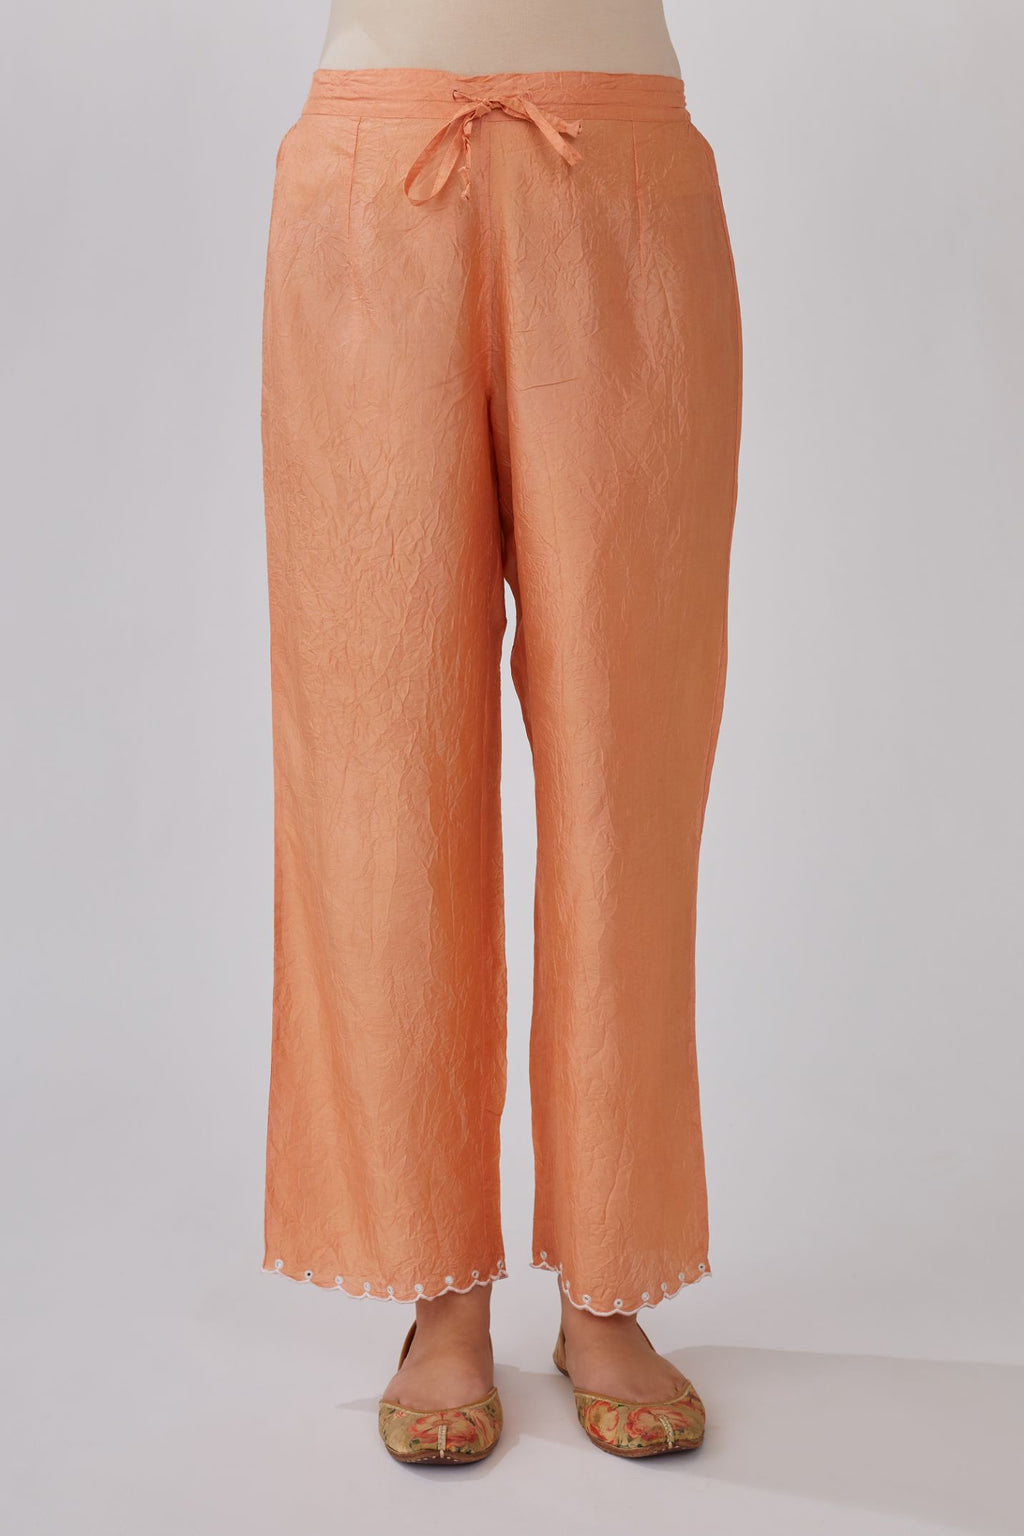 Peach hand crushed silk straight pants with embroidery and mirror hand work at bottom hem (Pants)